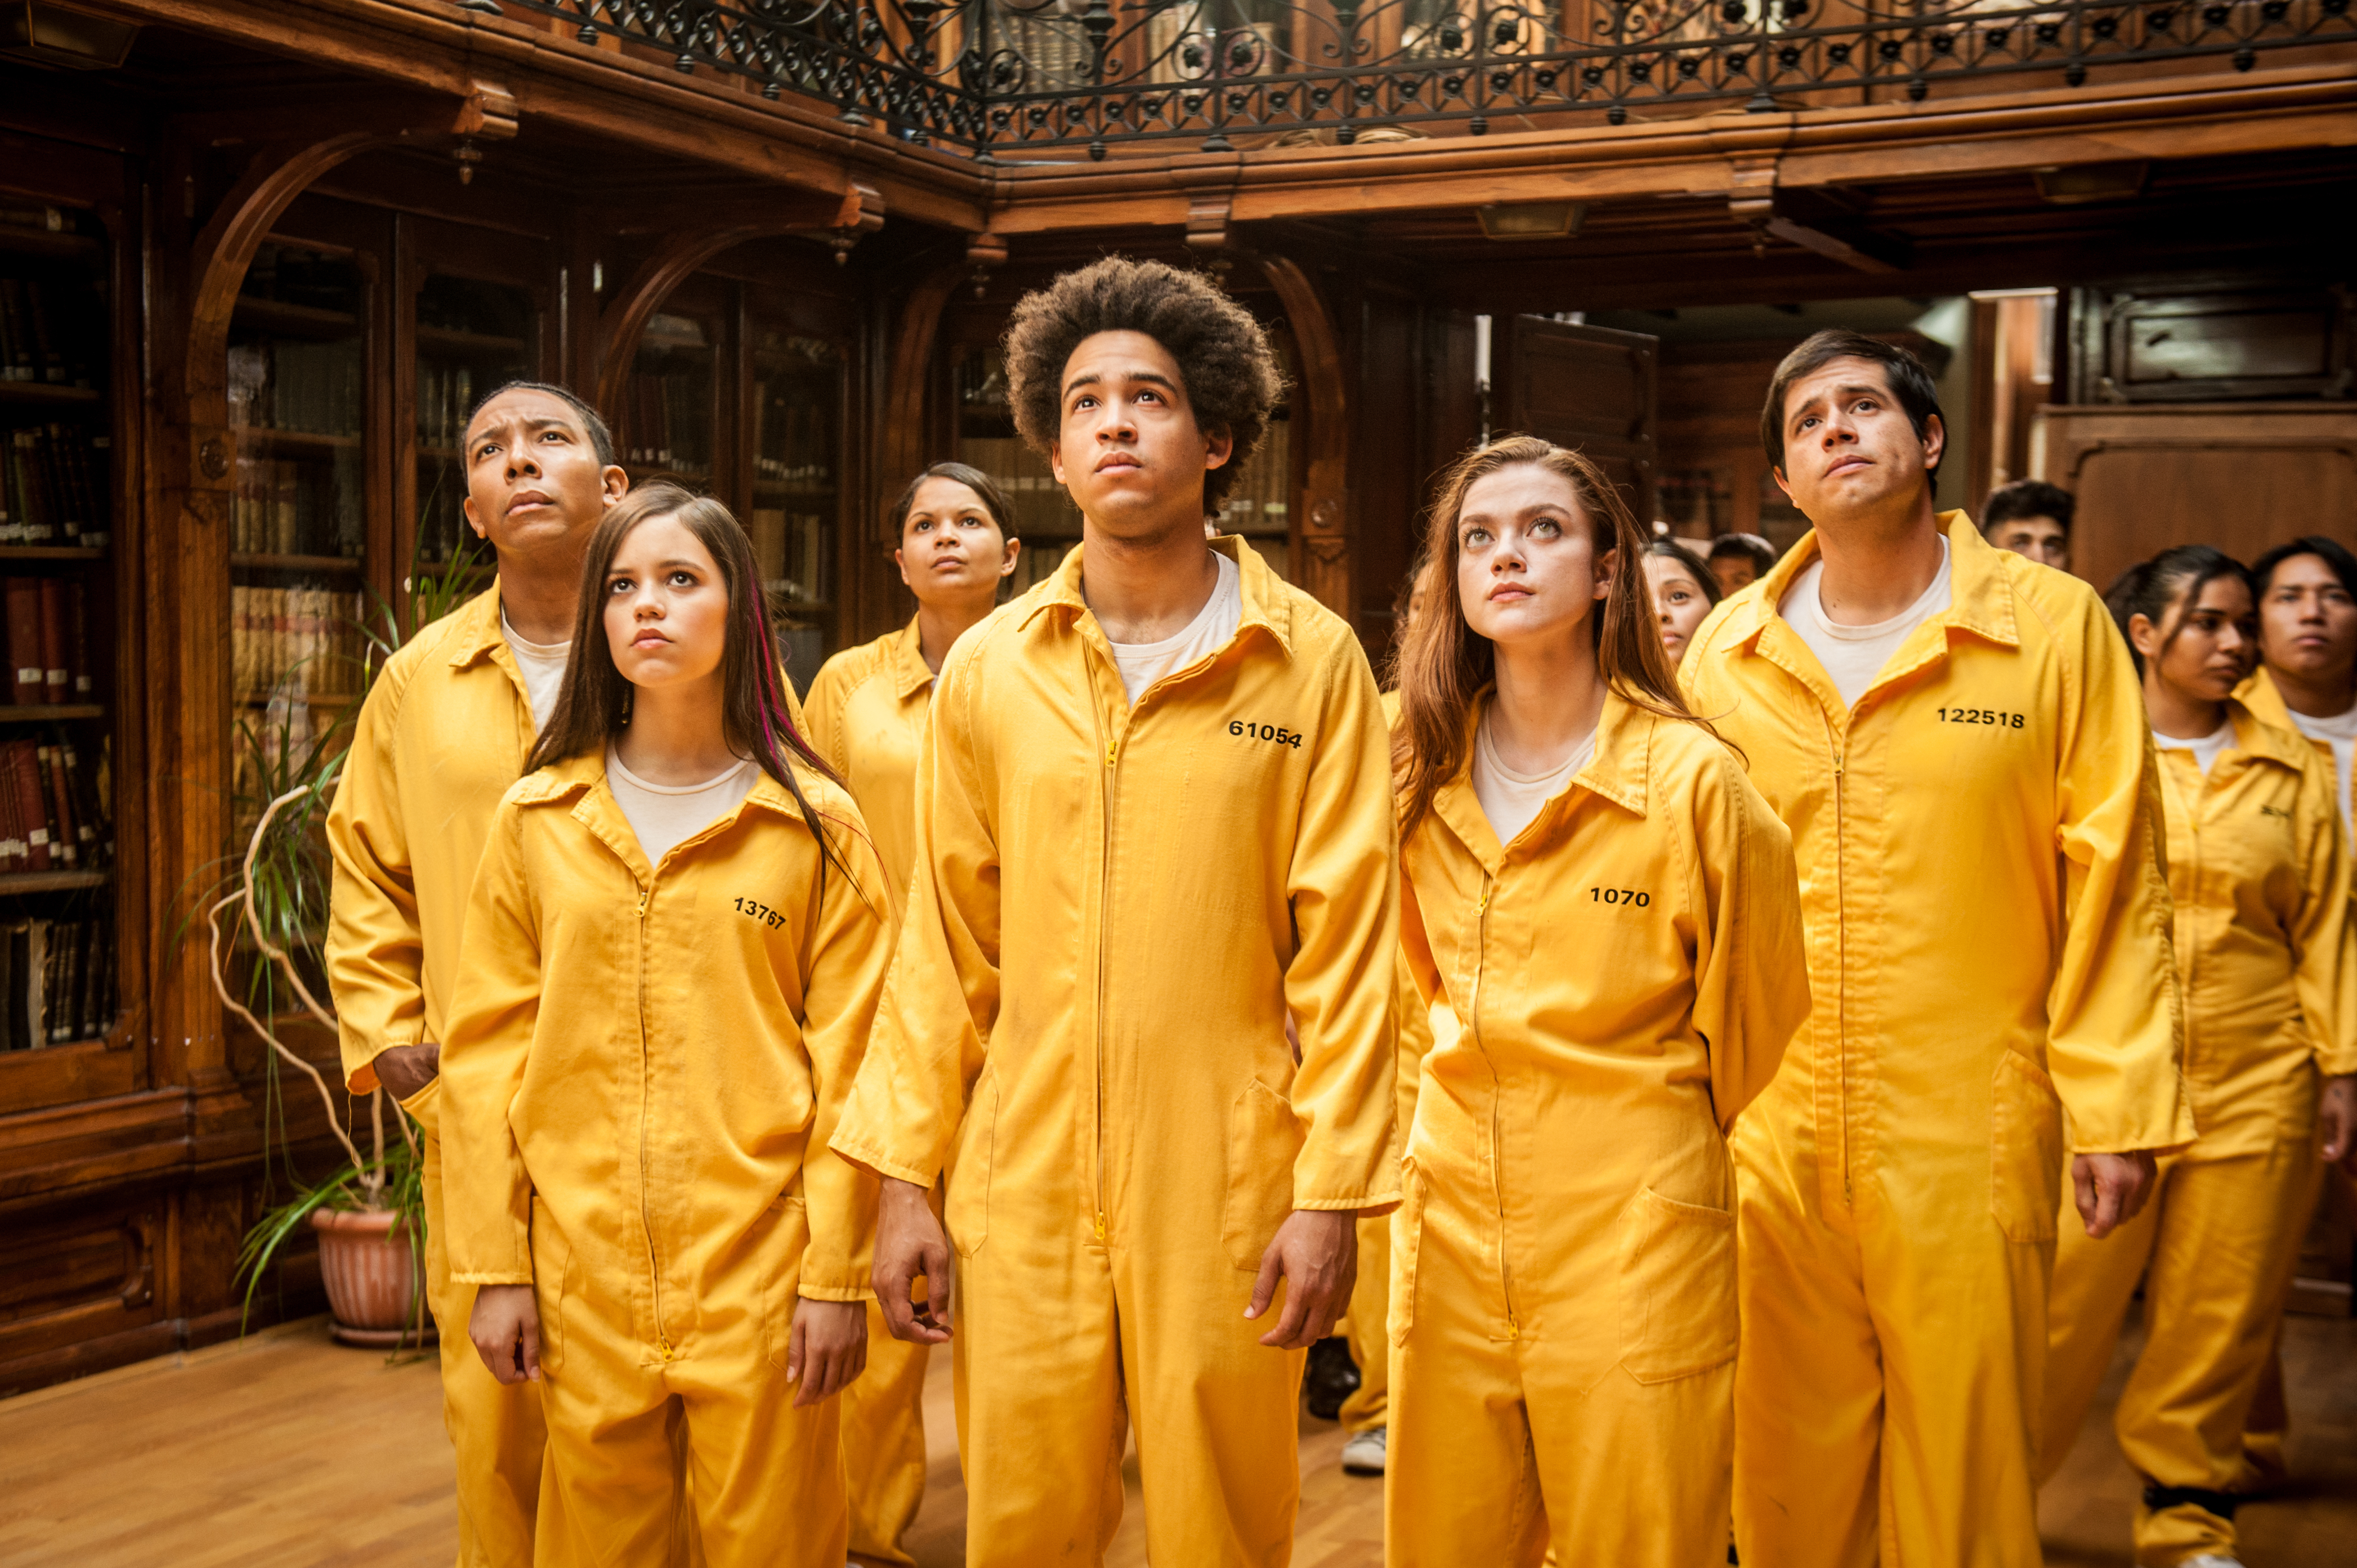 The cast of American Carnage stands in a library wearing yellow jumpsuits looking at someone above them